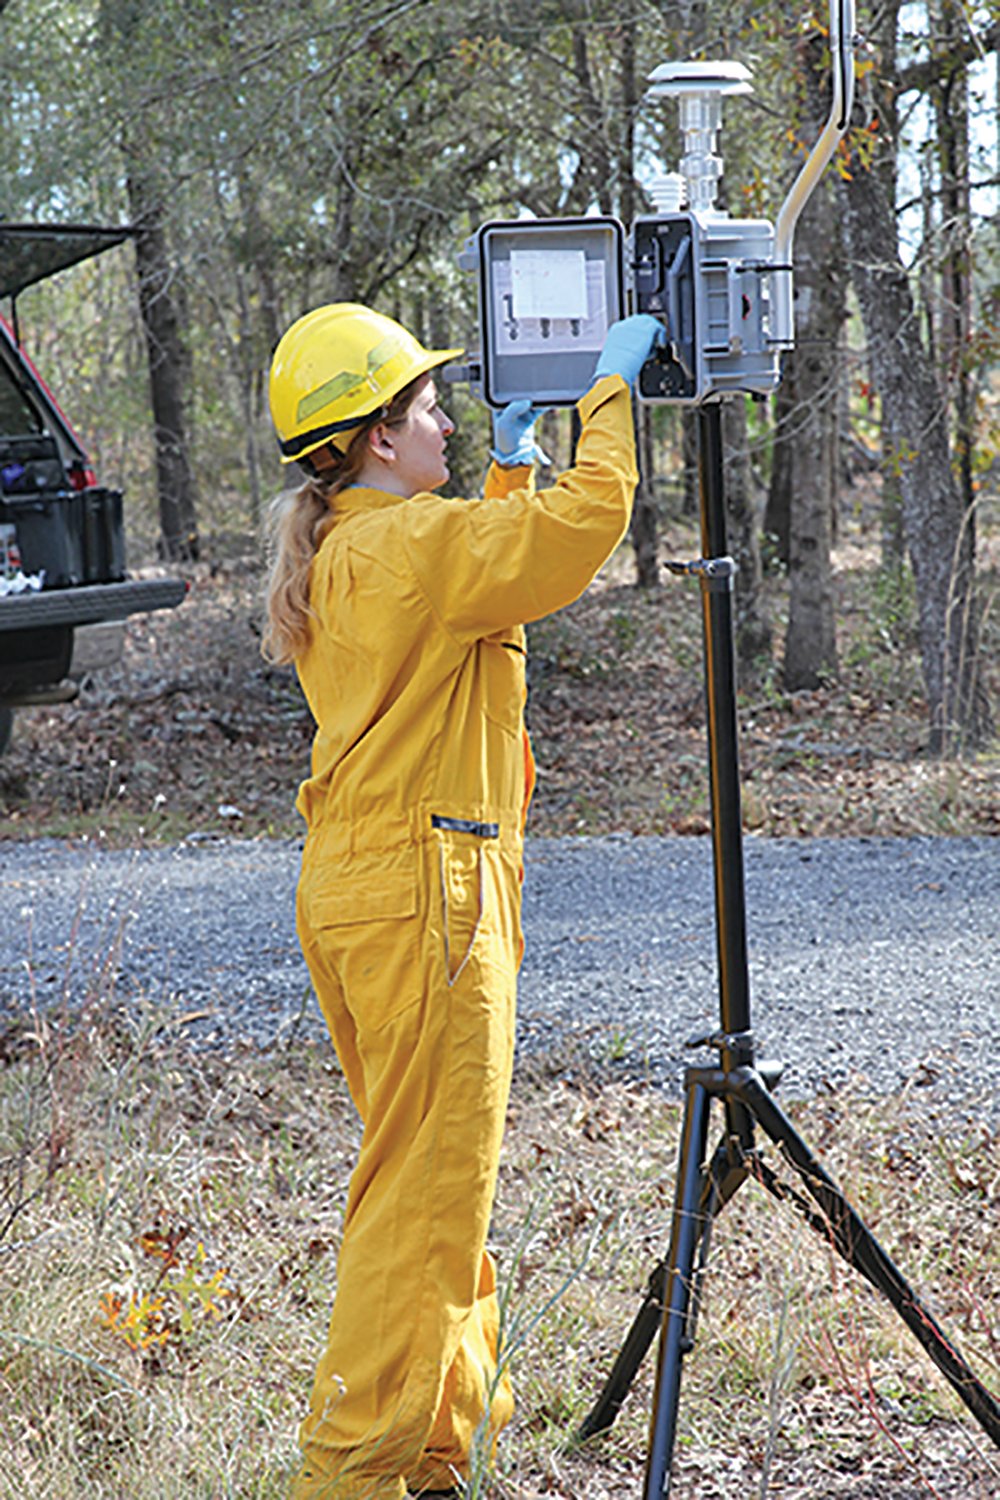 Rachel Moore collects smoke samples at the UF/IFAS Ordway-Swisher Biological Station.